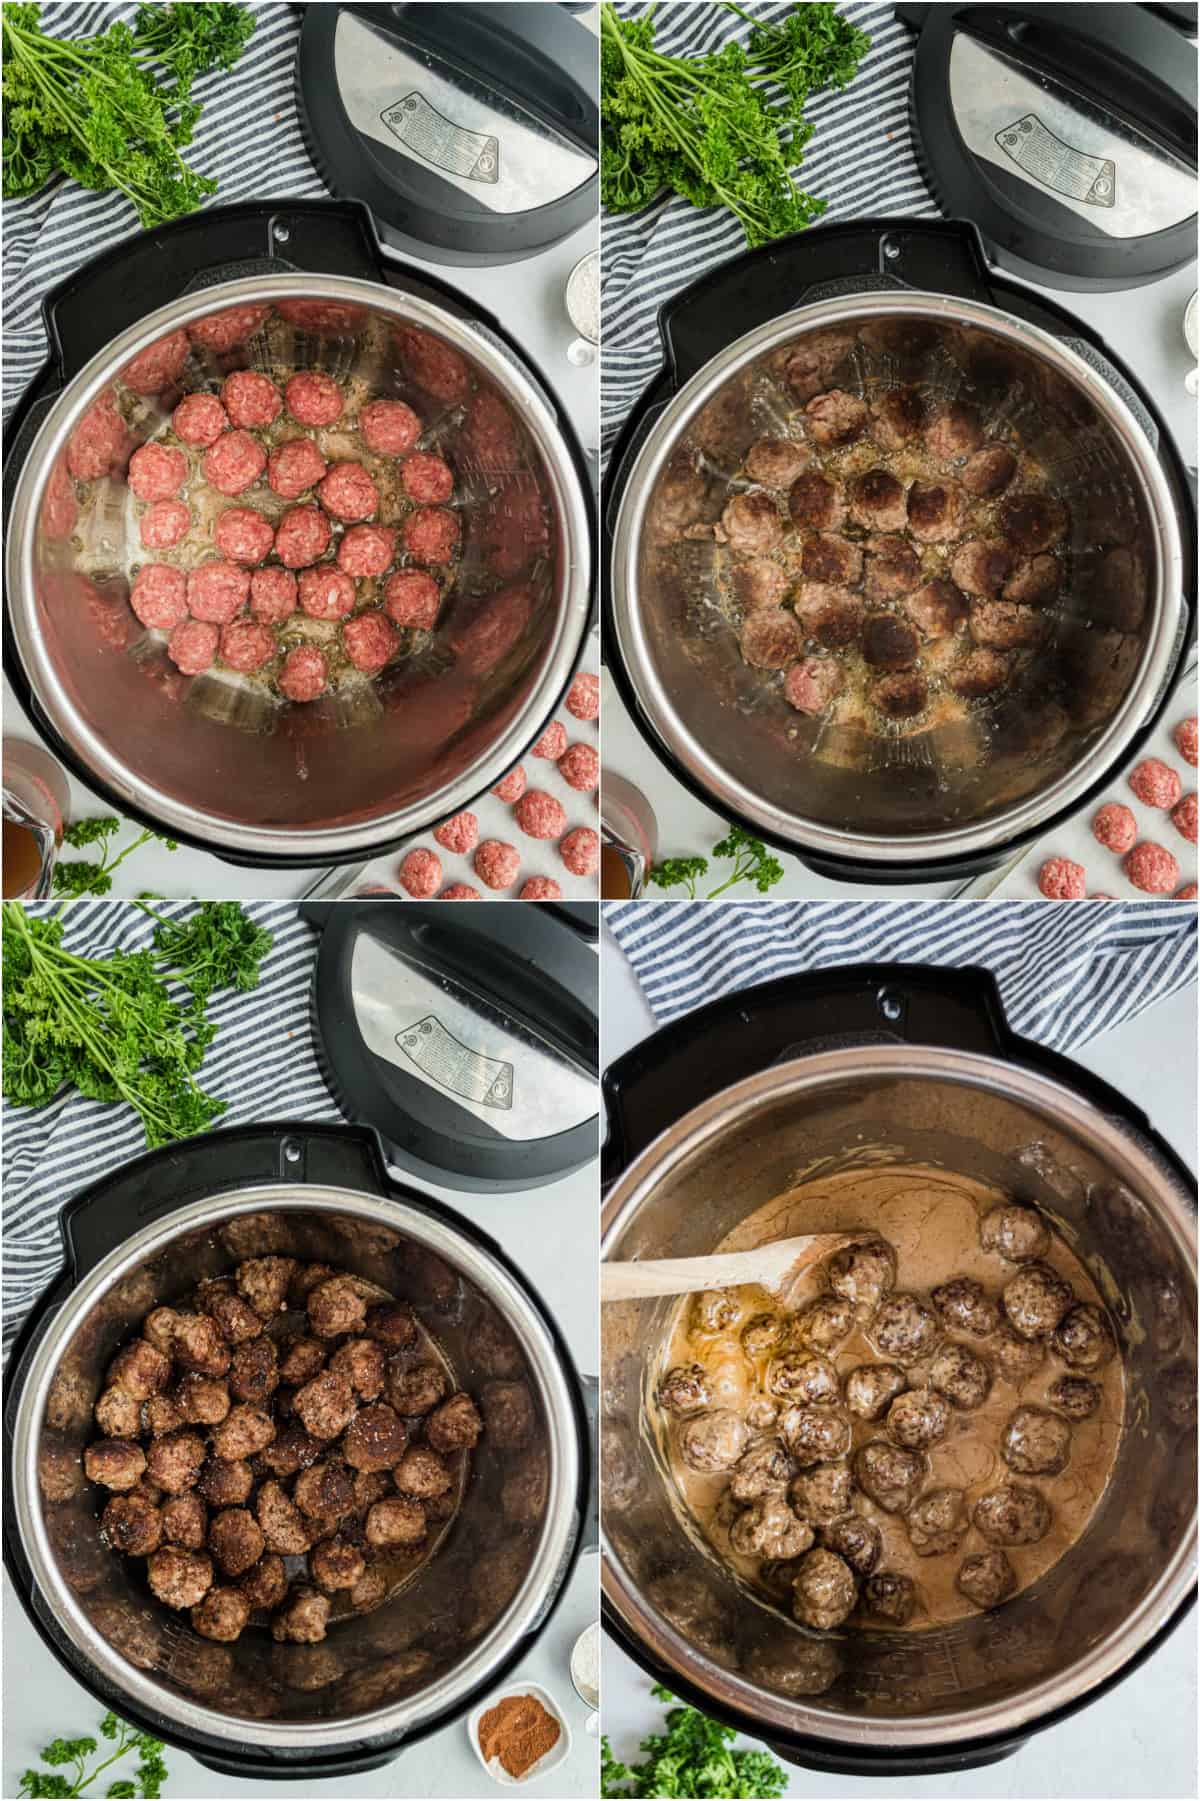 Step by step photos showing how to cook meatballs in the instant pot pressure cooker.